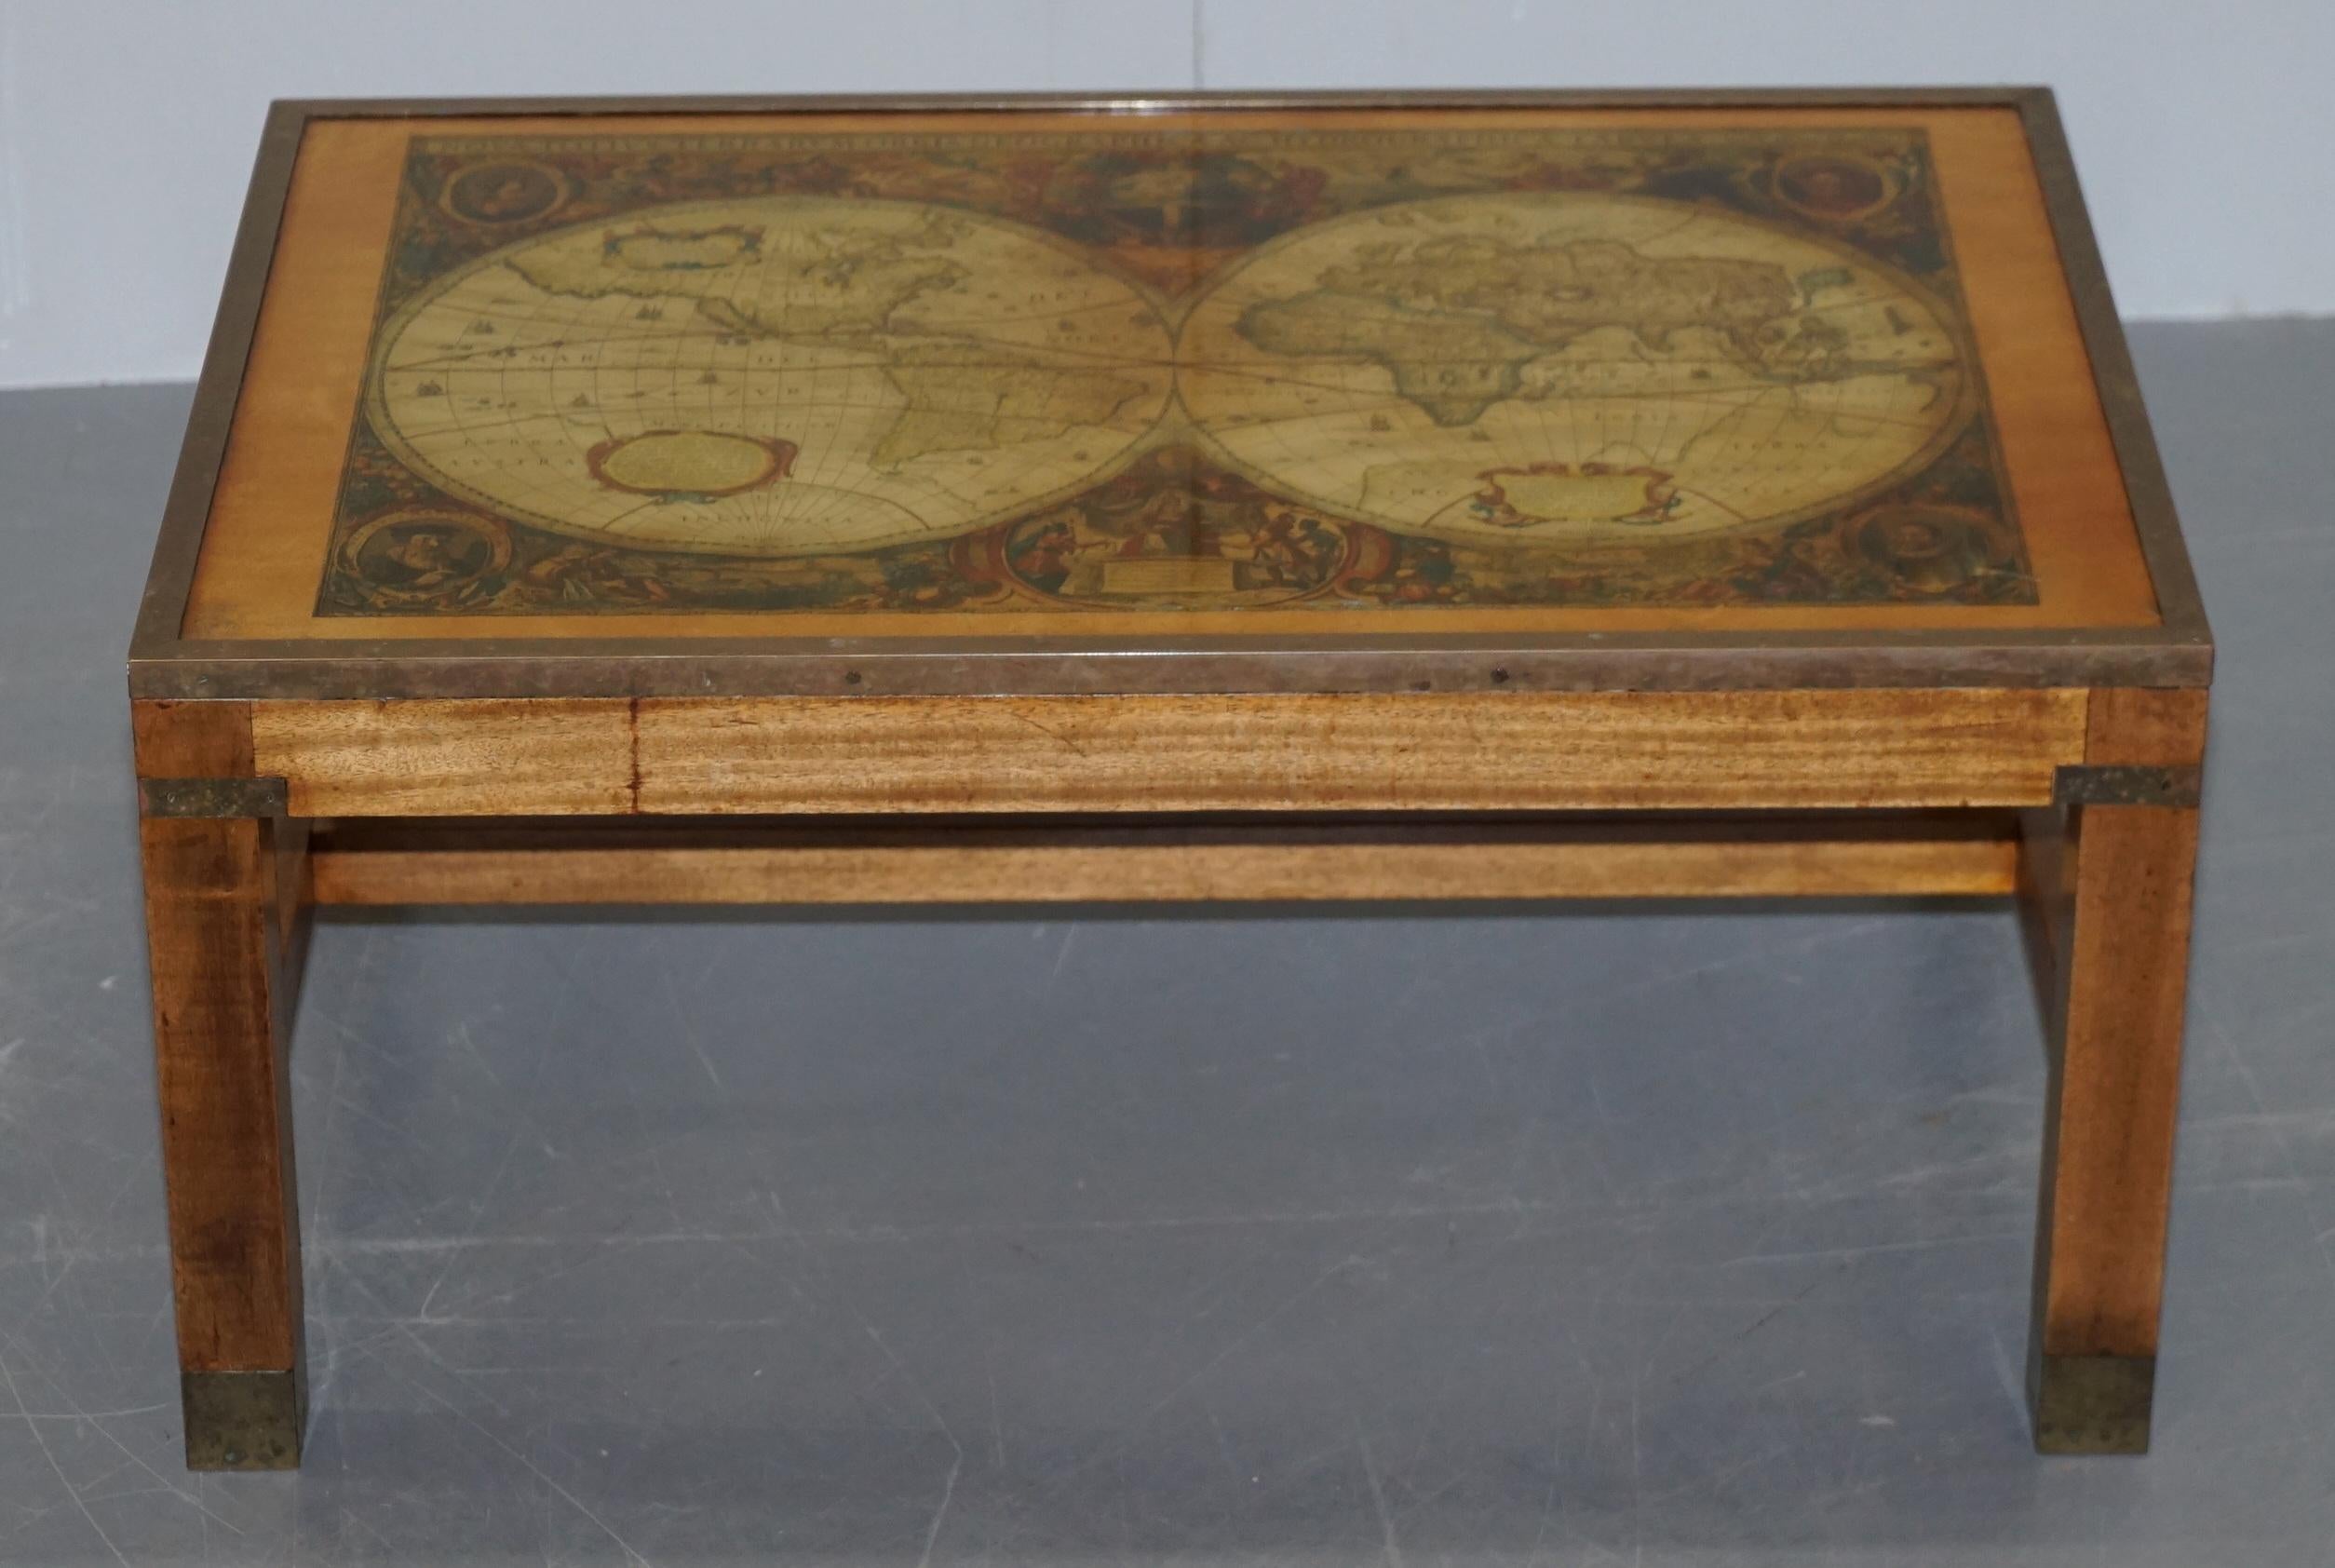 We are delighted to offer for sale this stunning military Campaign table with antique style world map

A very good looking and well made piece, in the military Campaign style with brass fixtures and fittings, the tabletop is thick glass

The